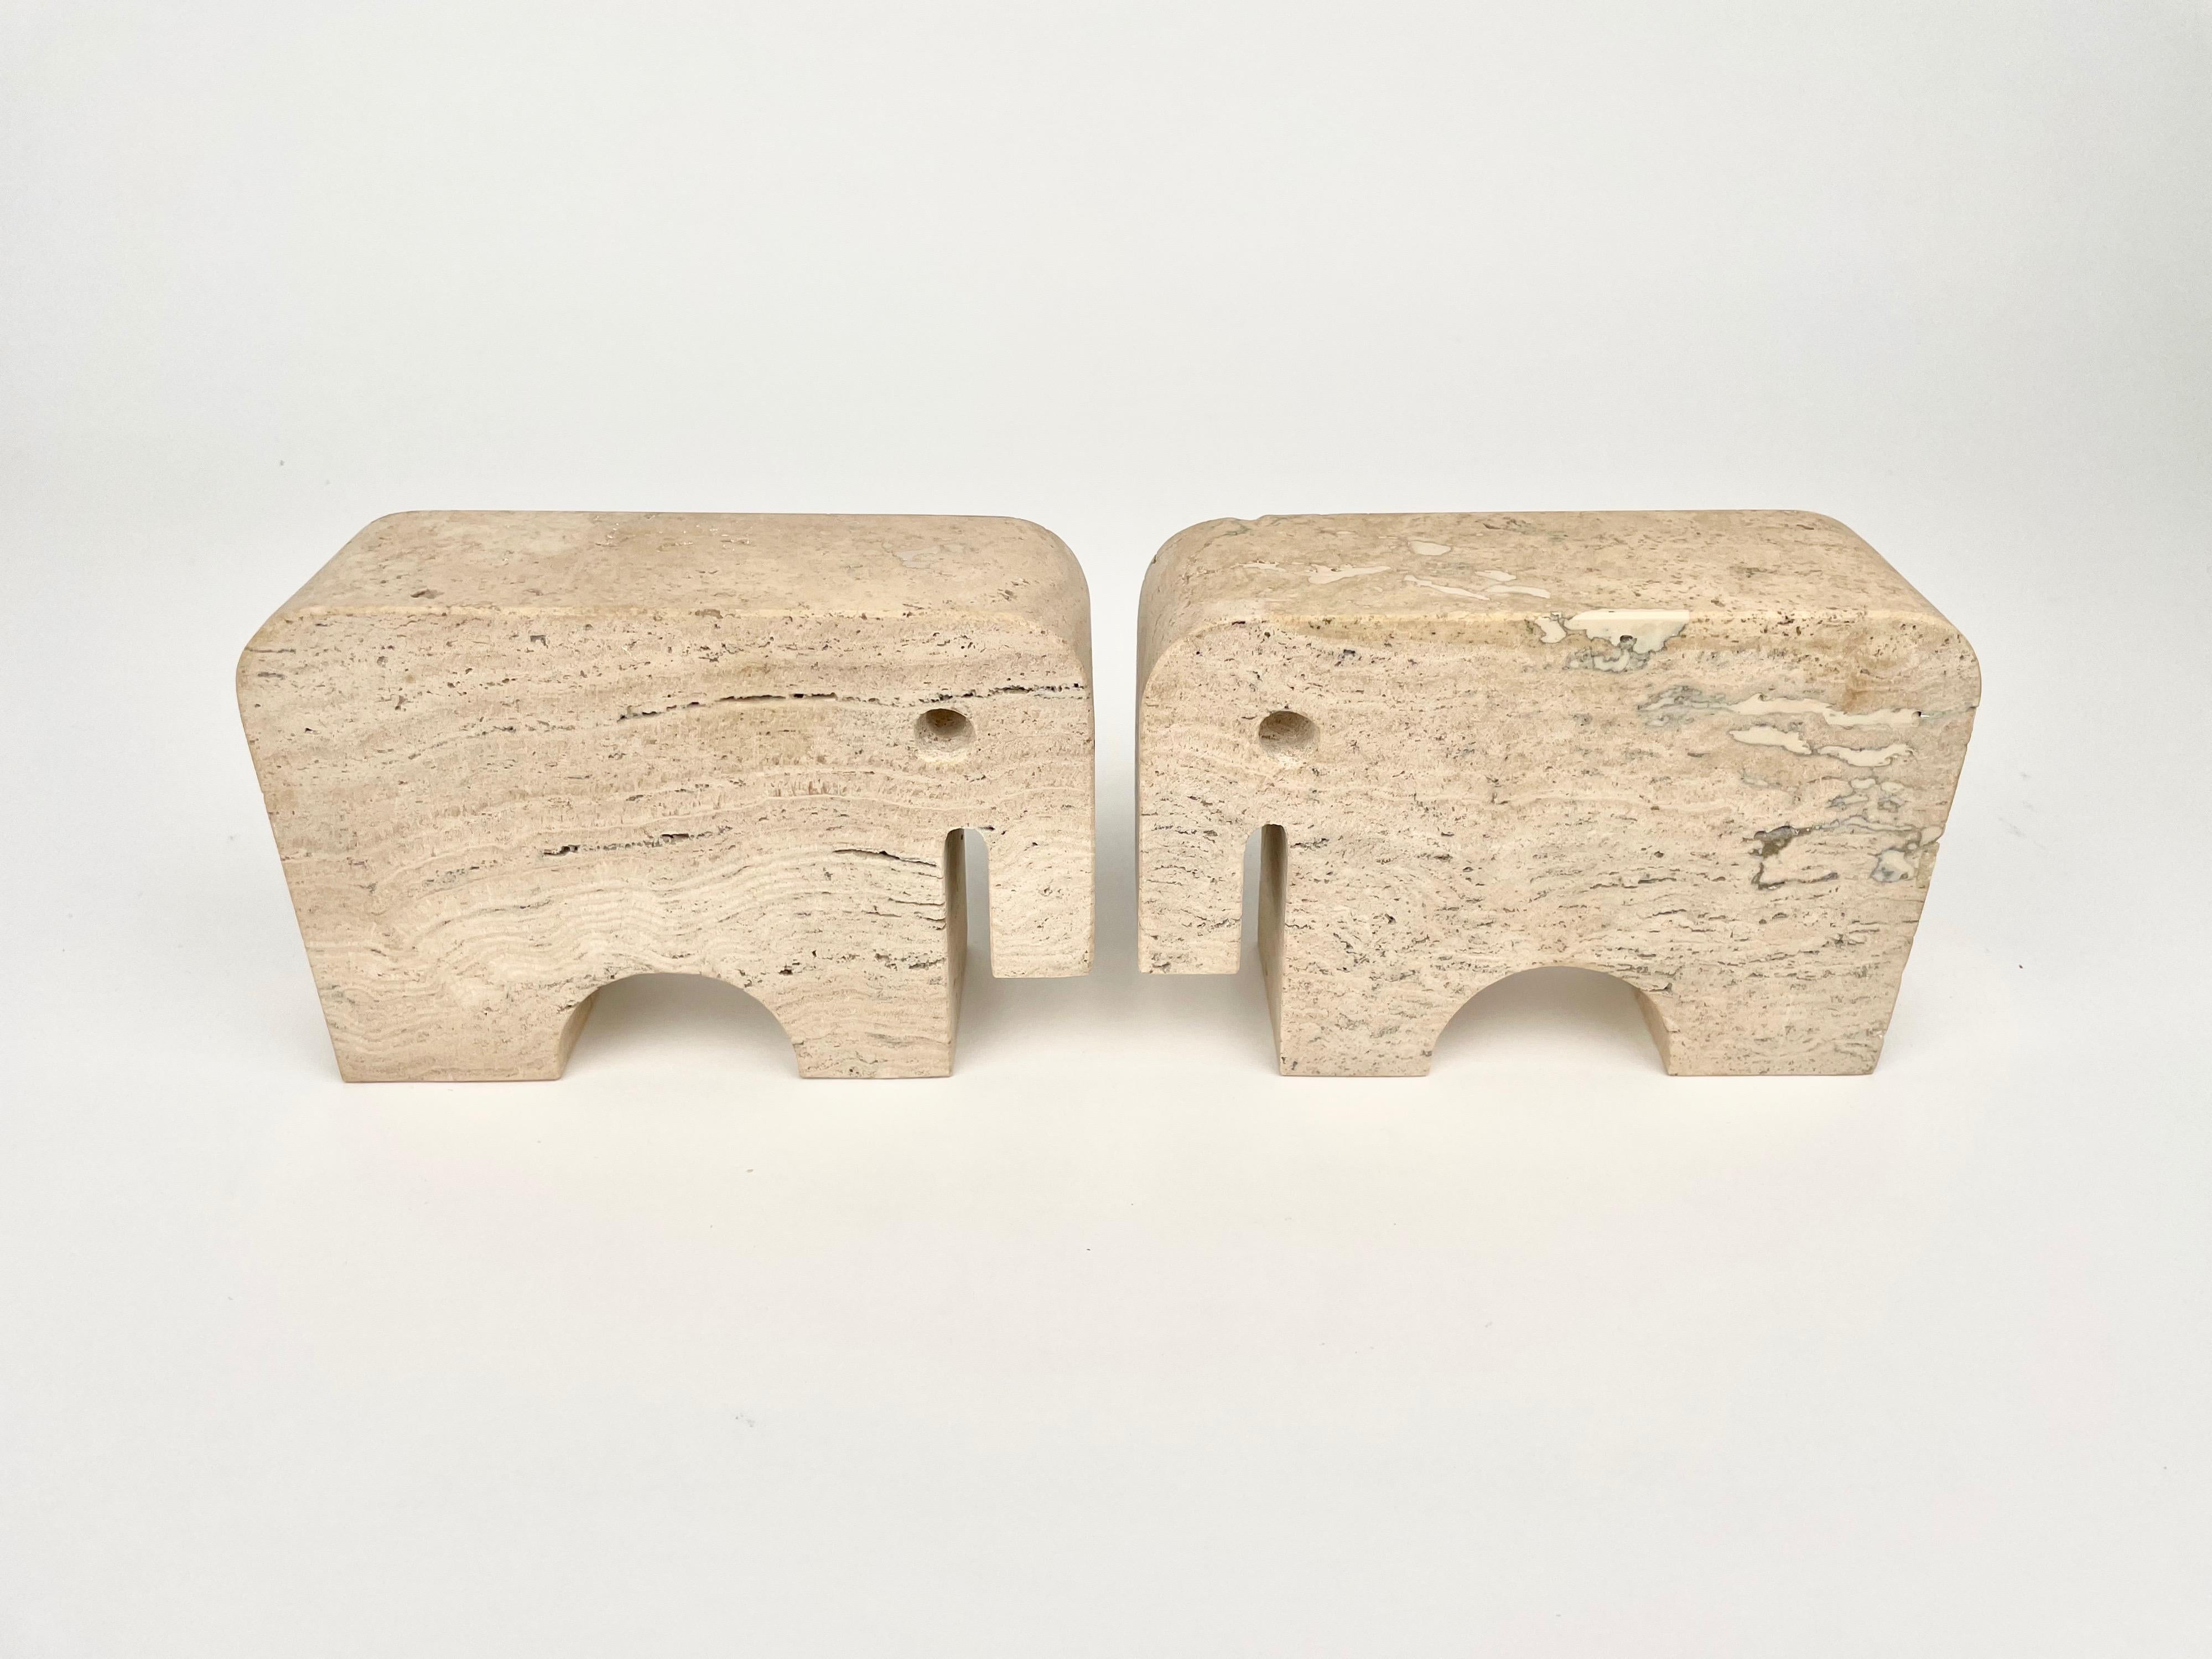 Pair of bookends in travertine marble in the shape of two elephants by Fratelli Mannelli. Made in Italy in the 1970s.